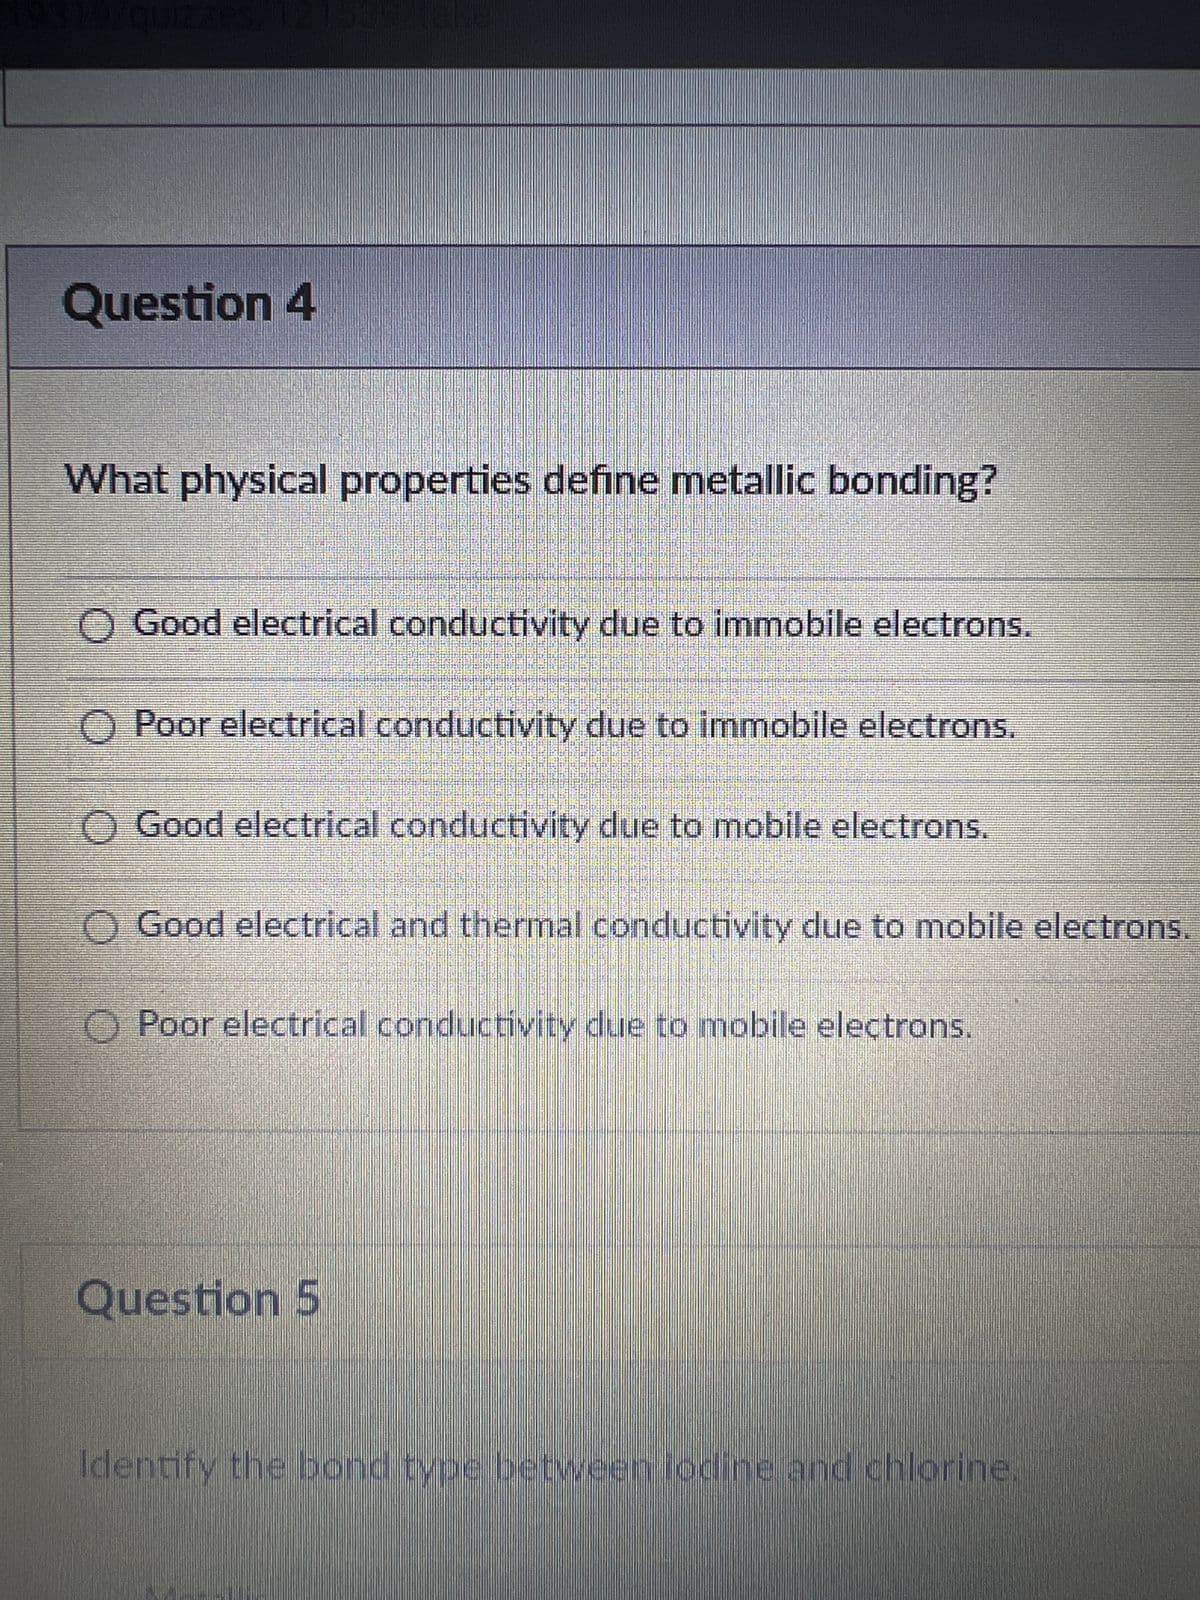 Question 4
What physical properties define metallic bonding?
O Good electrical conductivity due to immobile electrons.
O Poor electrical conductivity due to immobile electrons.
OO
Good electrical conductivity due to mobile electrons.
Good electrical and thermal conductivity due to mobile electrons.
OPoor electrical conductivity due to mobile electrons.
Question 5
Identify the bond type between lodine and chlorine.